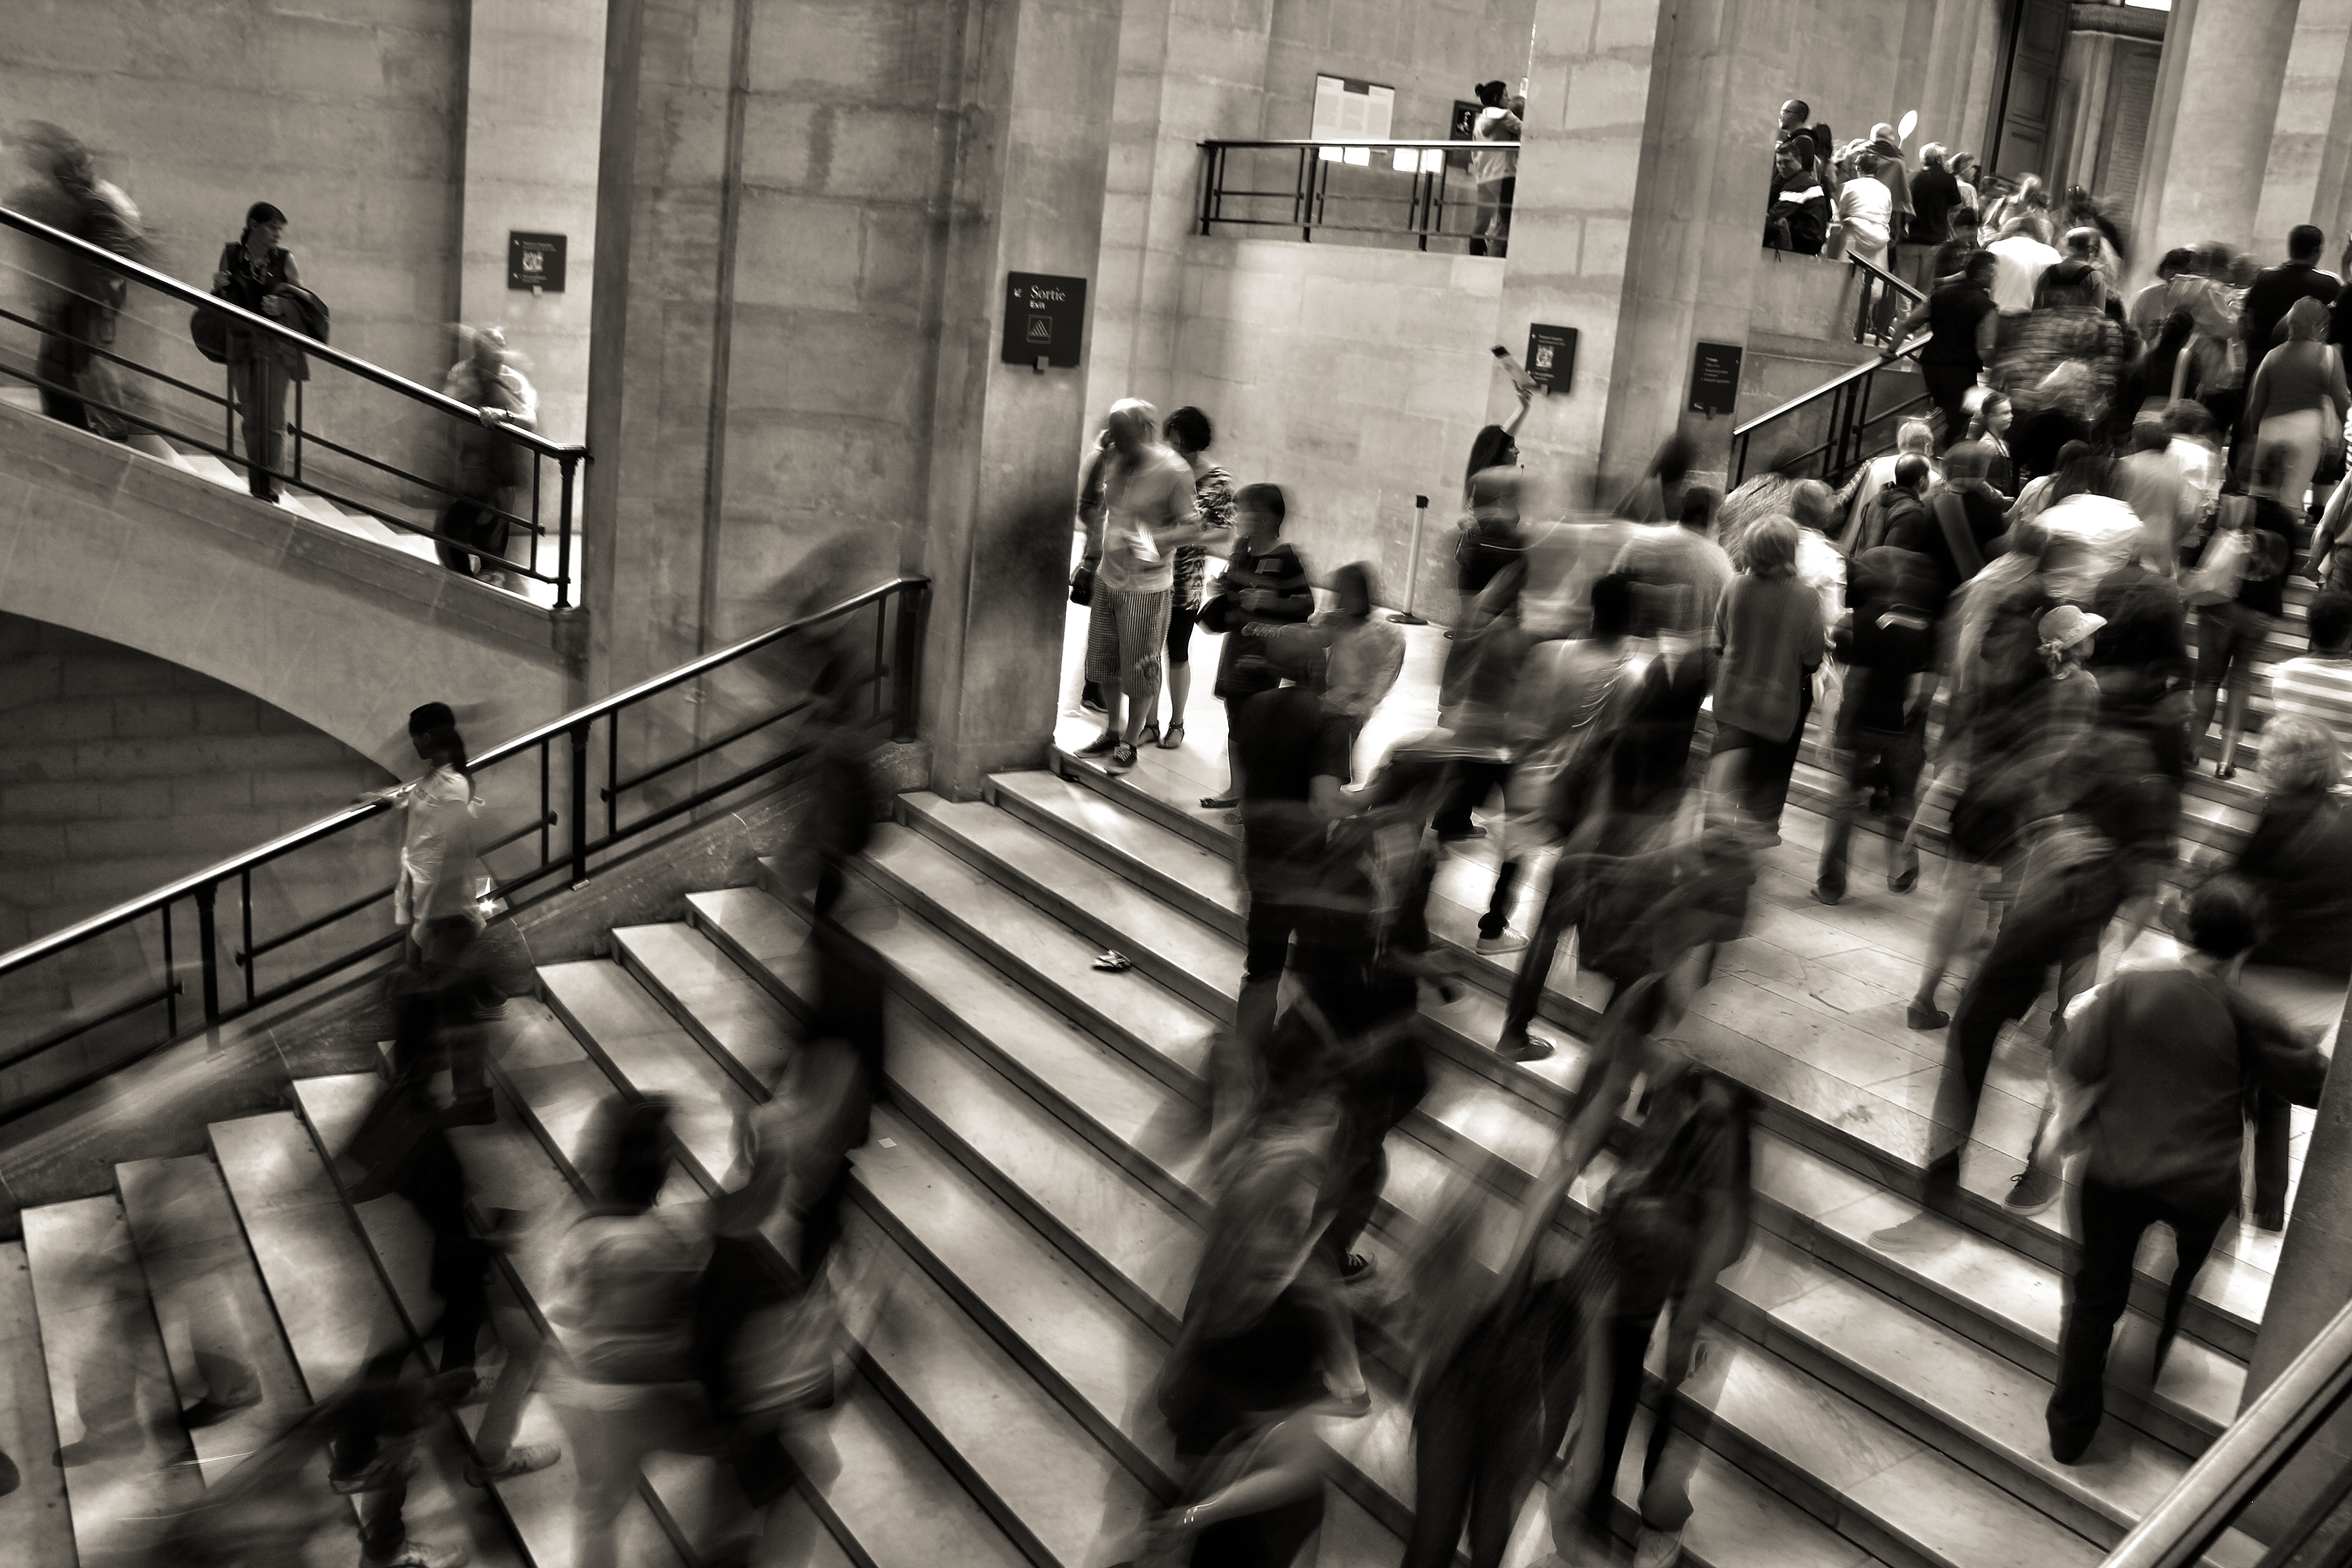 A blurred image of people walking up a steps.